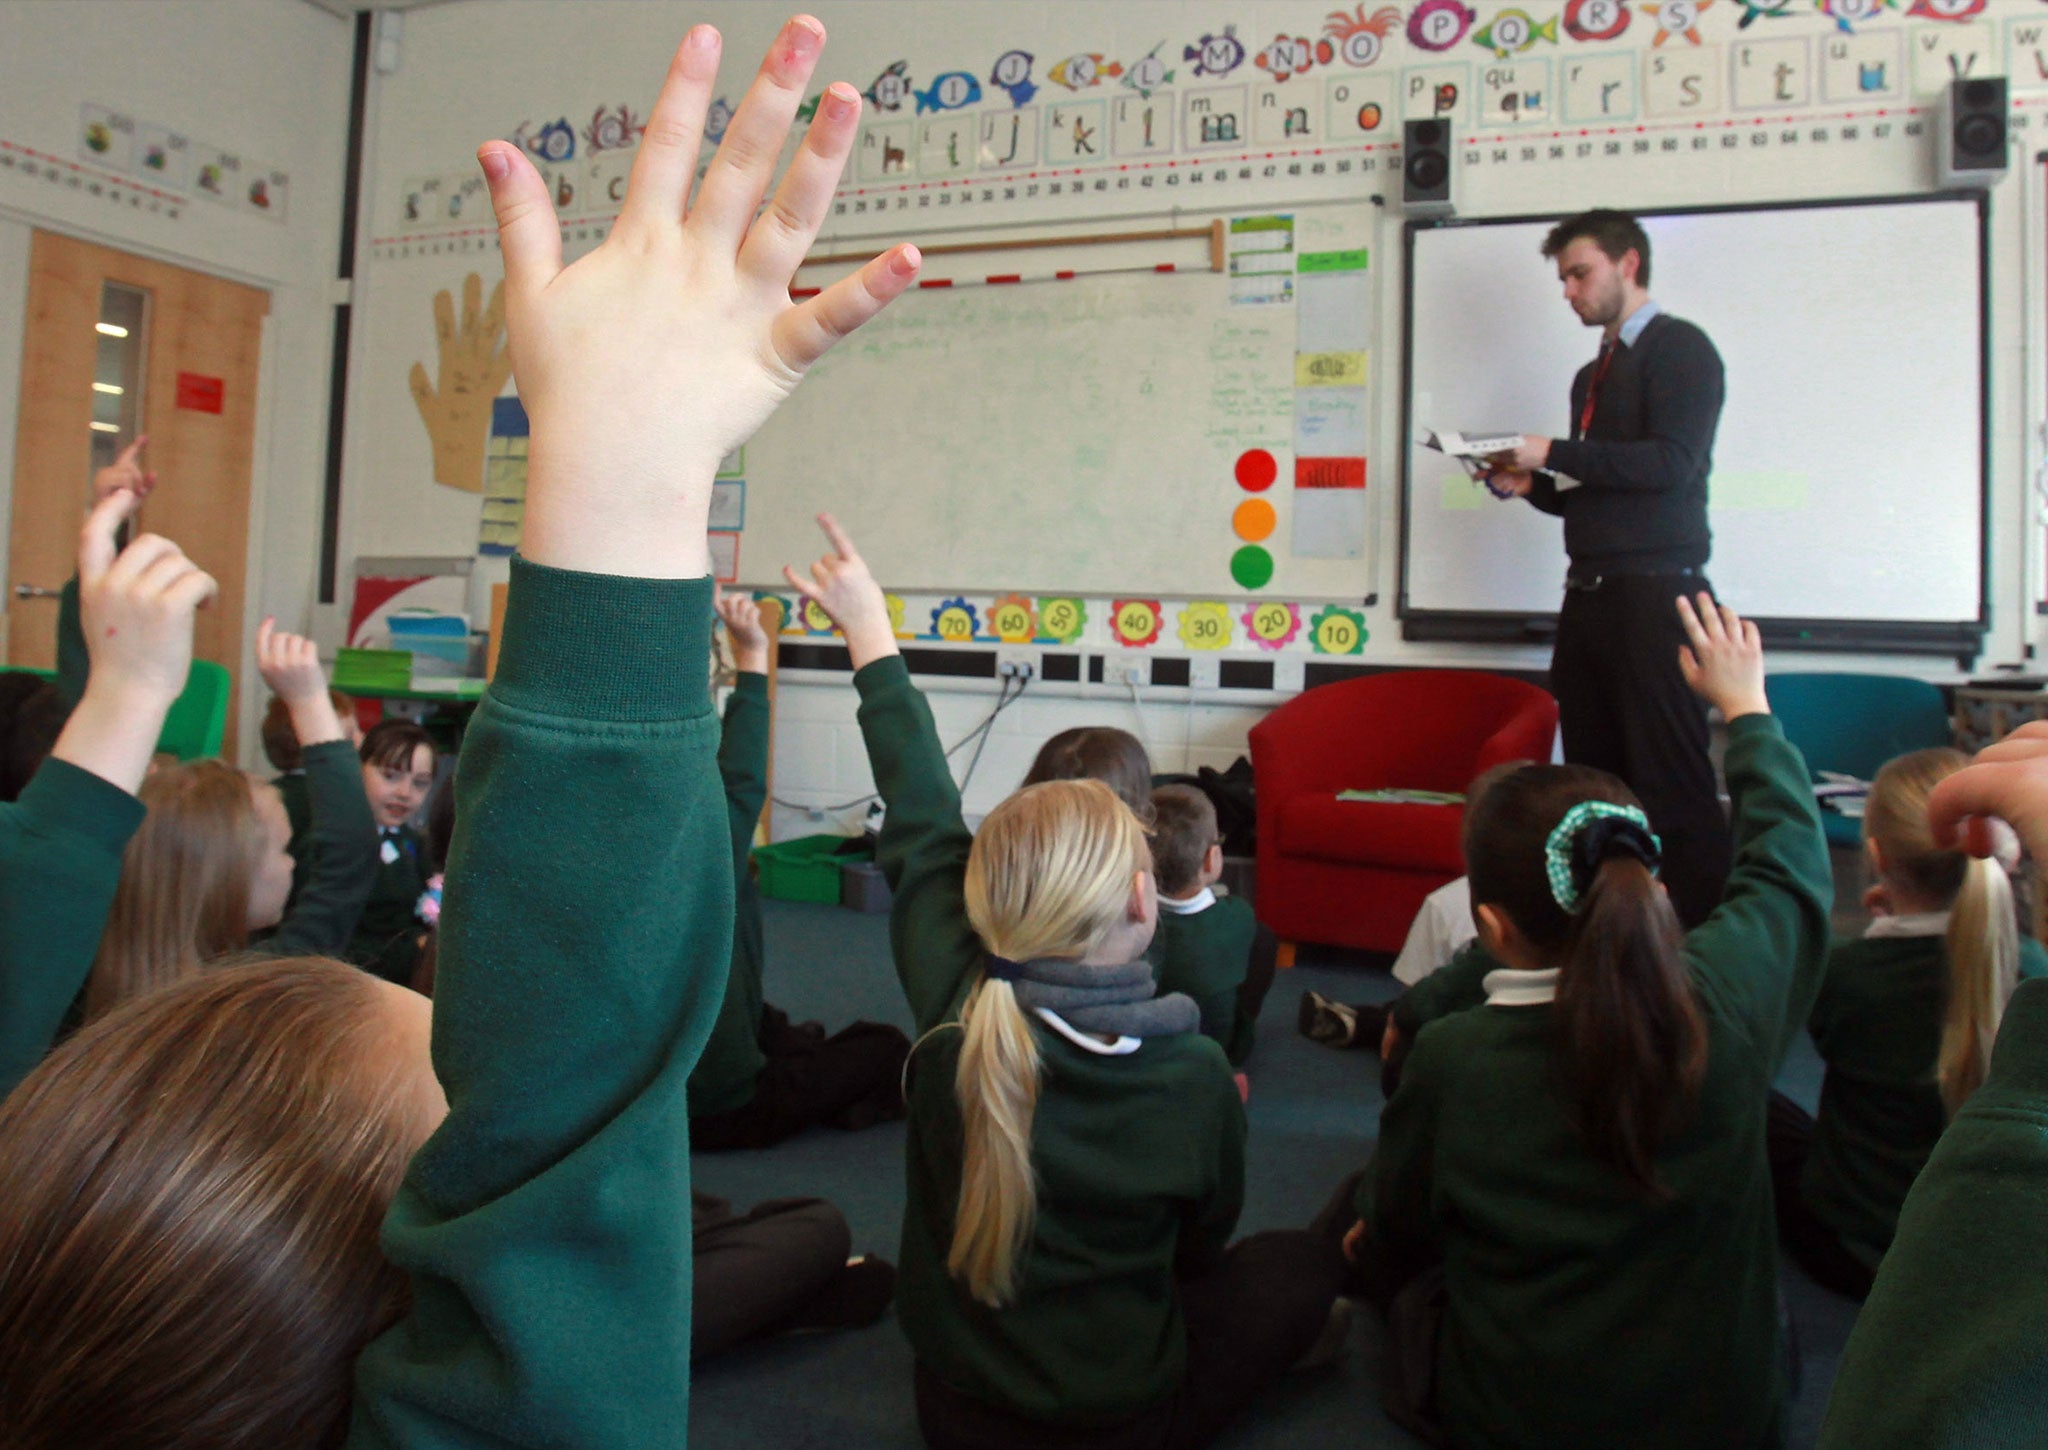 Under Lib Dem plans, sex education would start from the age of seven